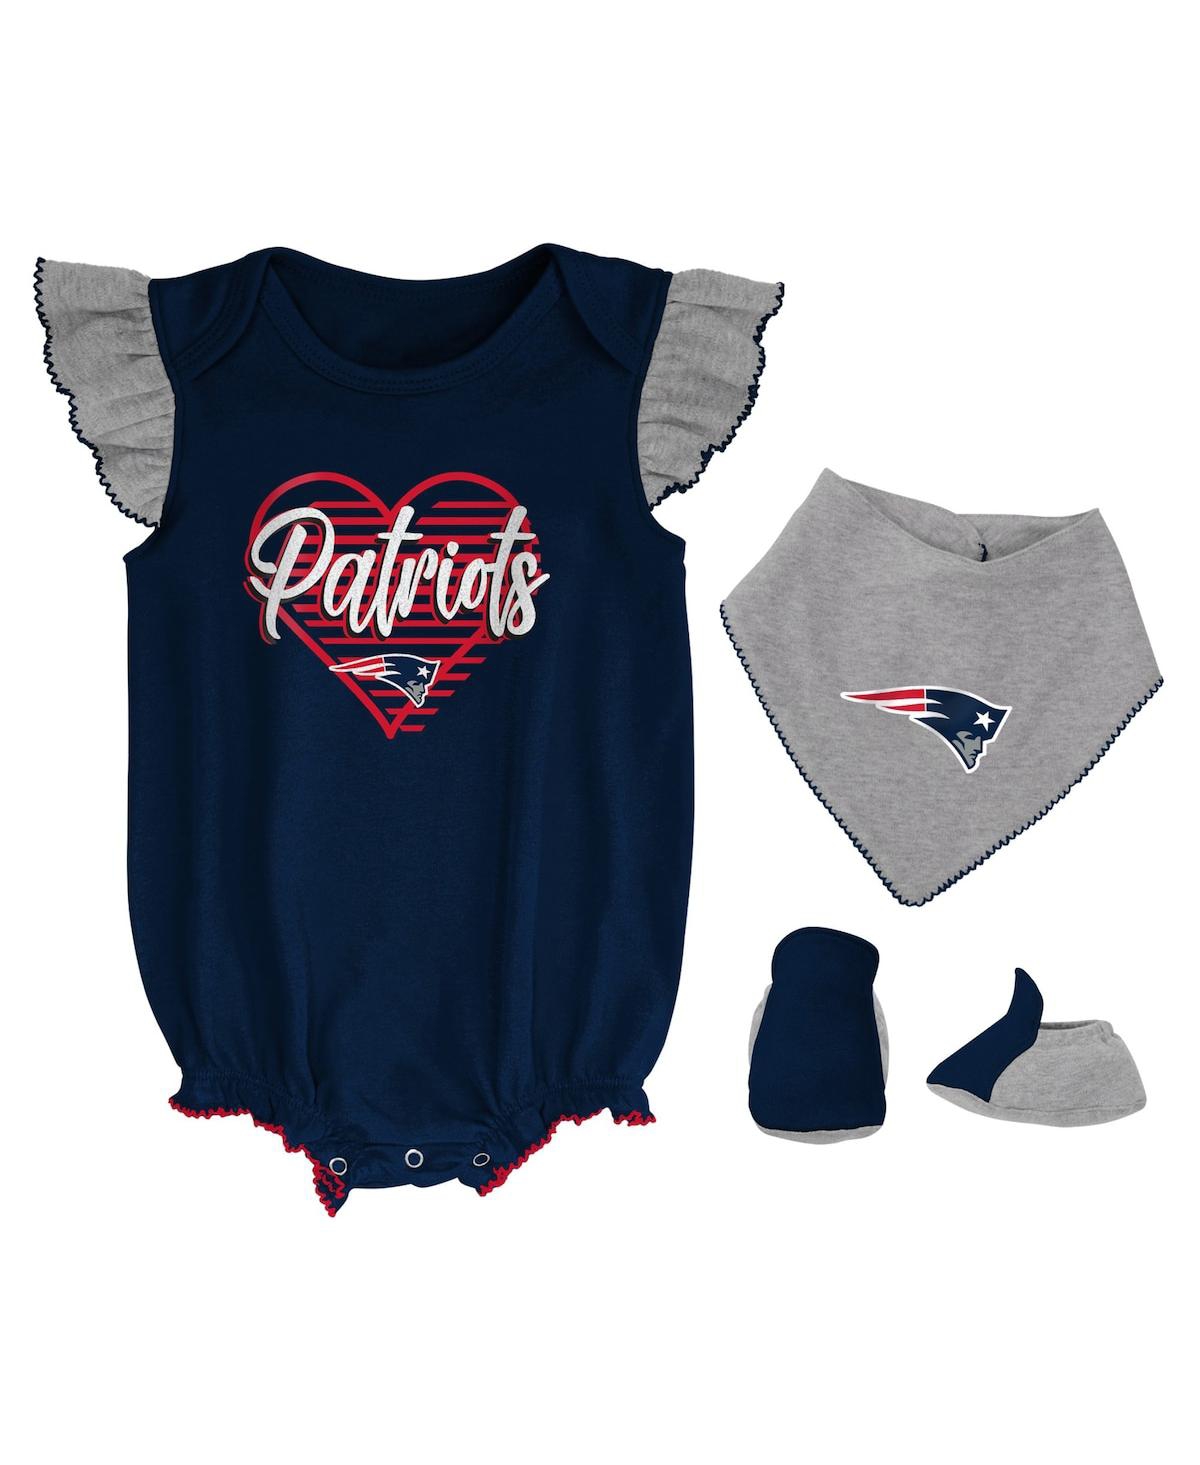 Outerstuff Babies' Girls Newborn And Infant Navy, Heathered Gray New England Patriots All The Love Bodysuit Bib And Boo In Navy,heathered Gray